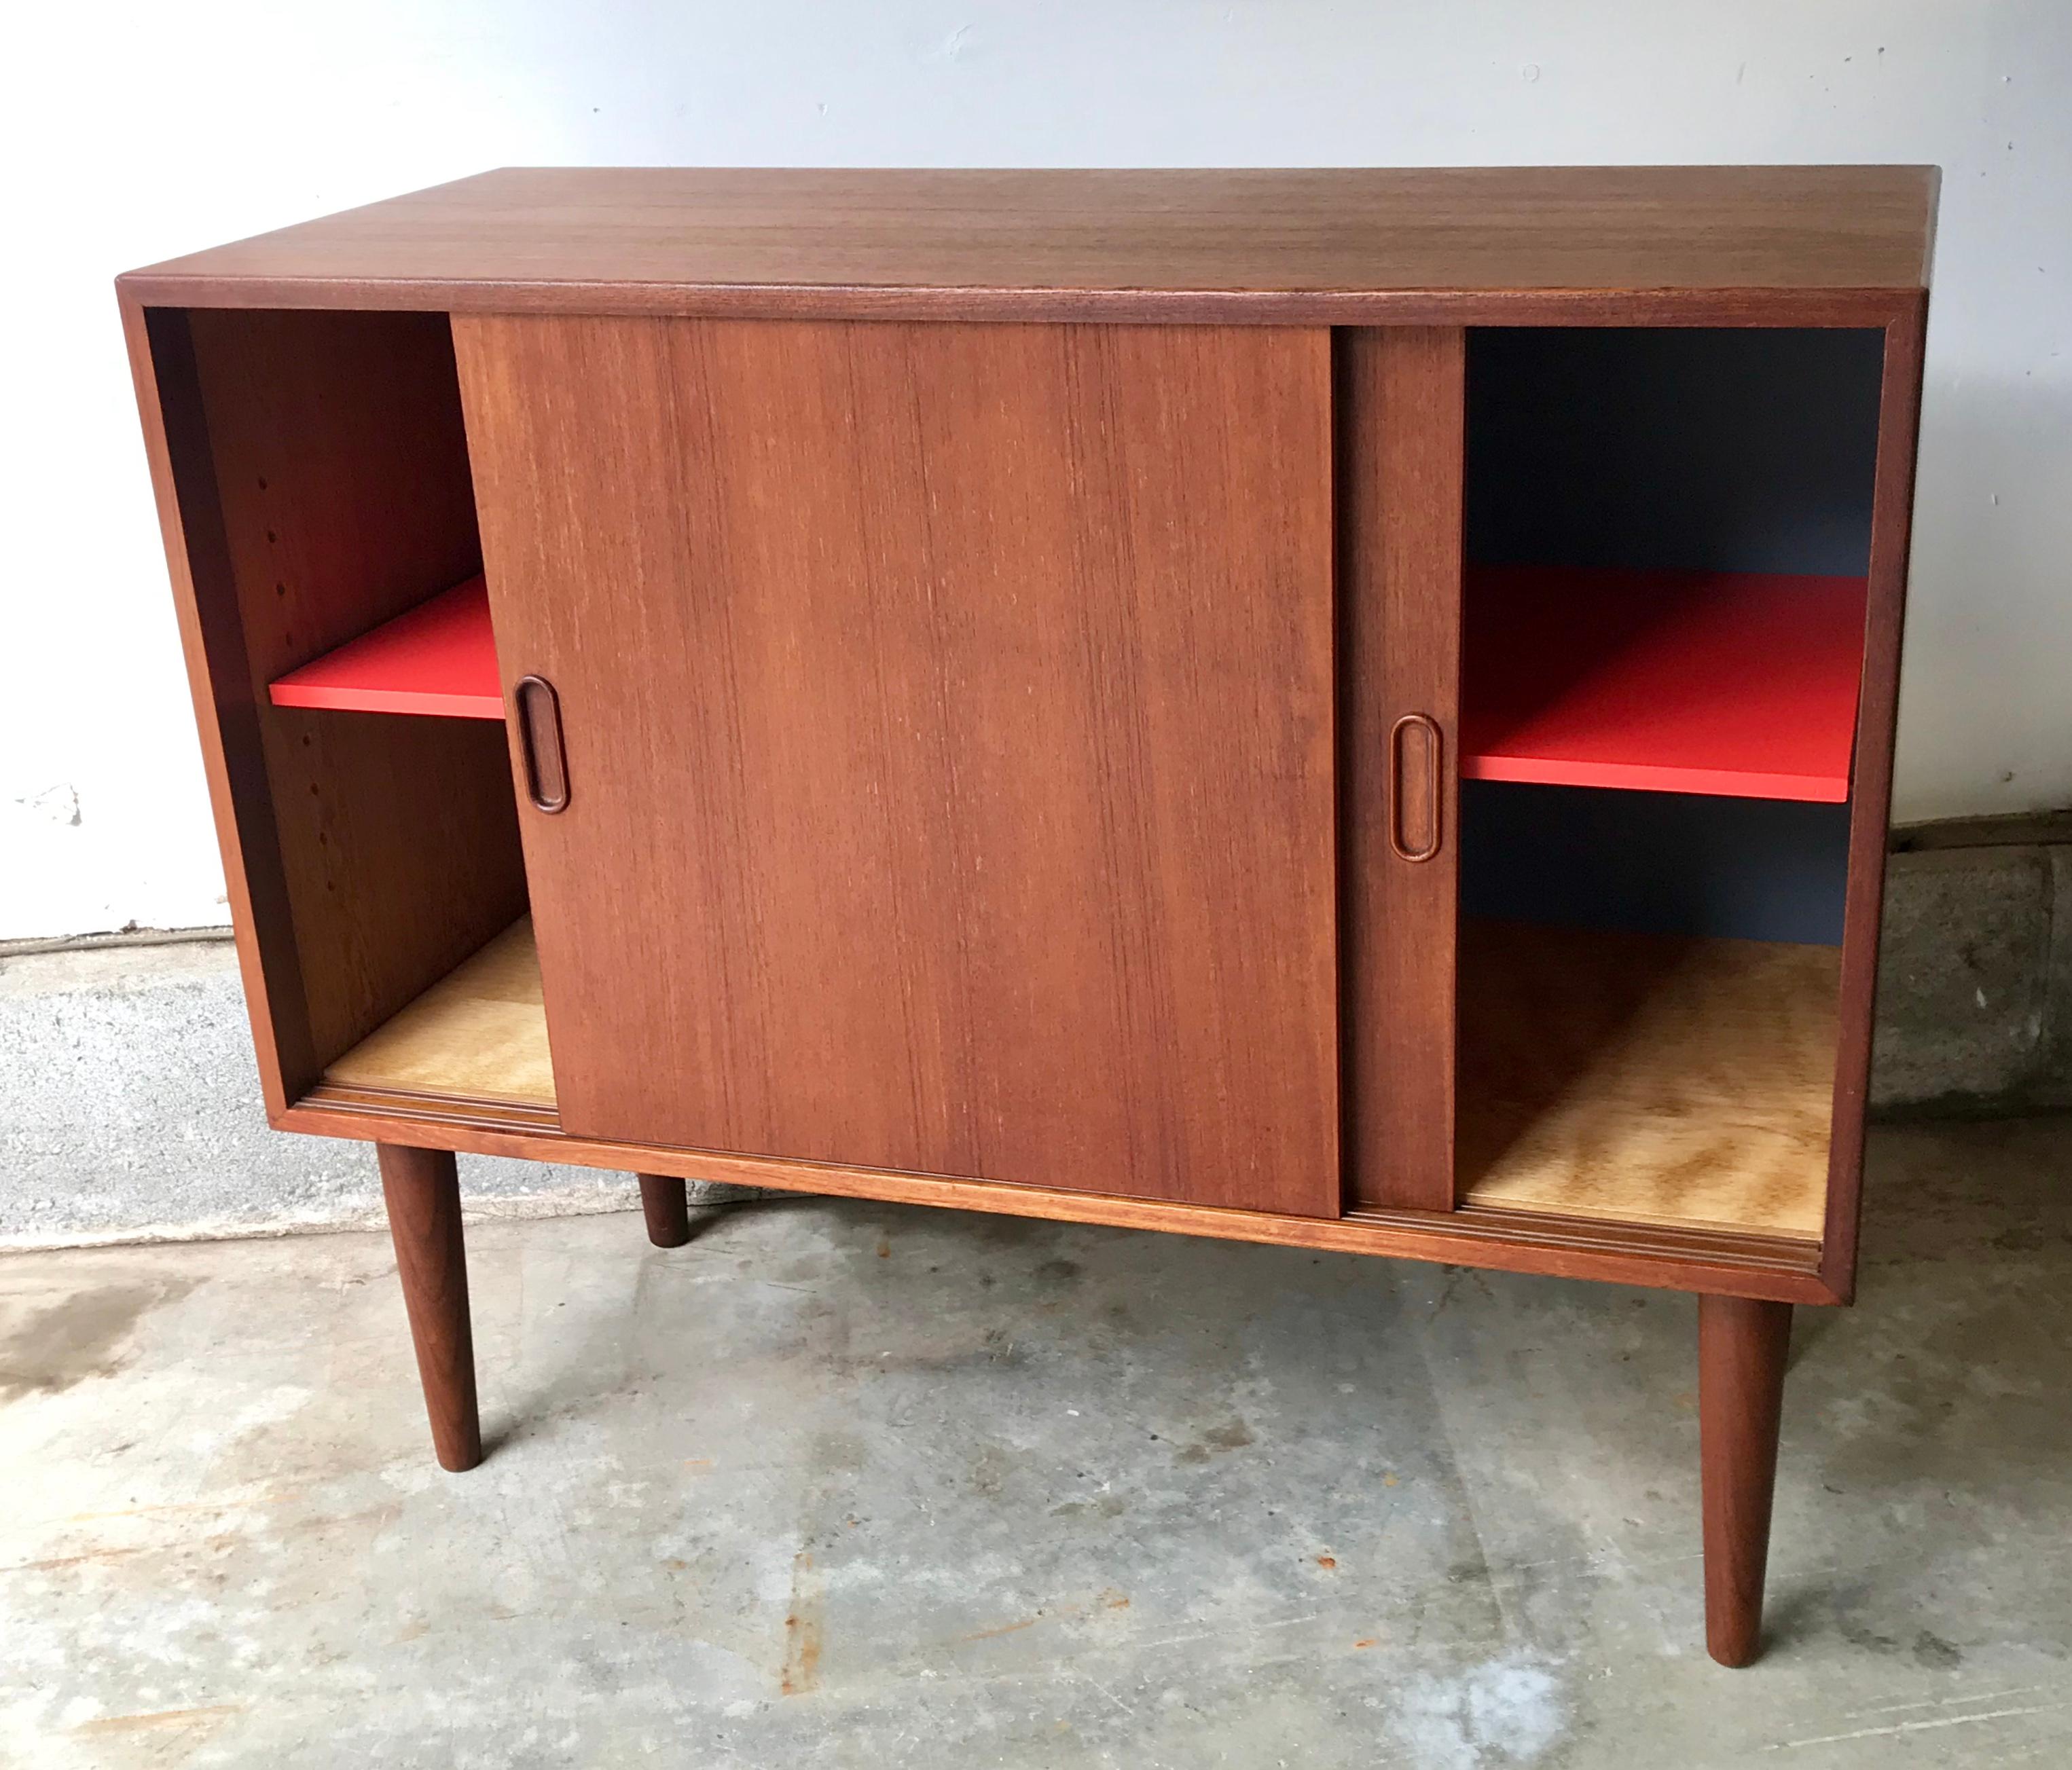 Very nice smaller scale teak credenza or storage cabinet, sliding doors with adjustable shelf. Professionally restored with new bottom and back panel with salsa colored red shelf.